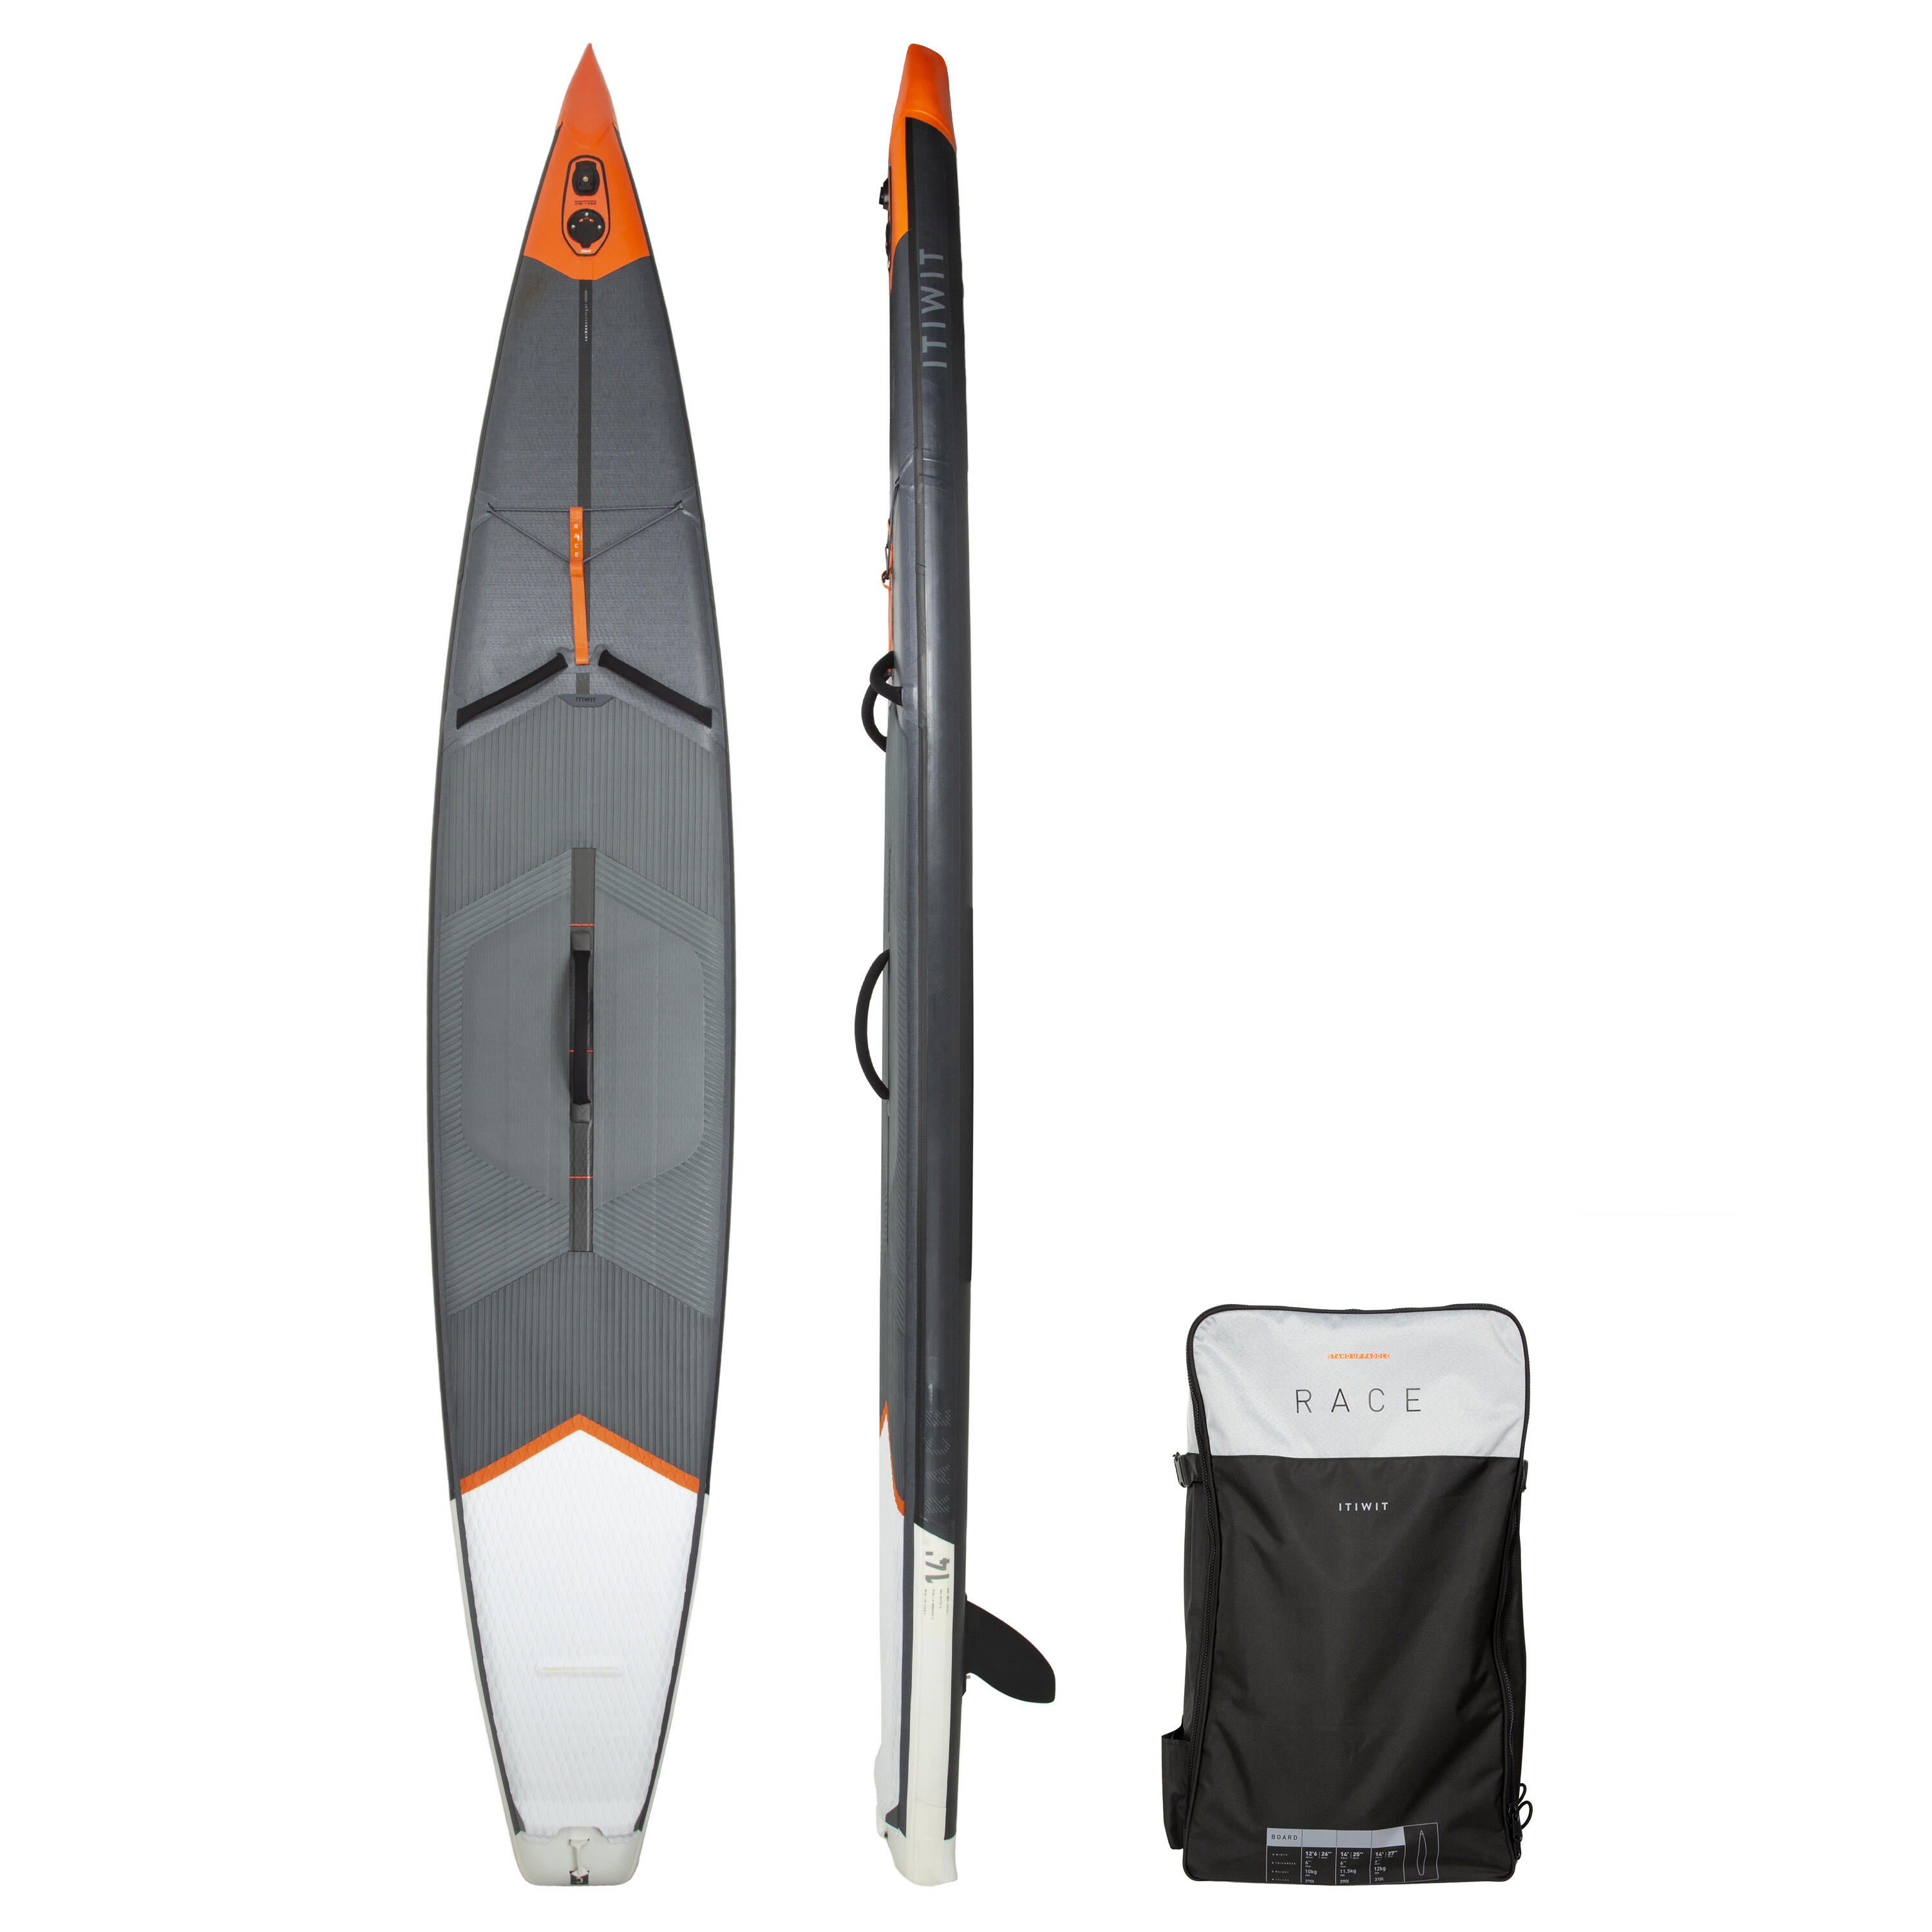 Inflatable stand-up paddle board Race 14'27" - R500 1/16